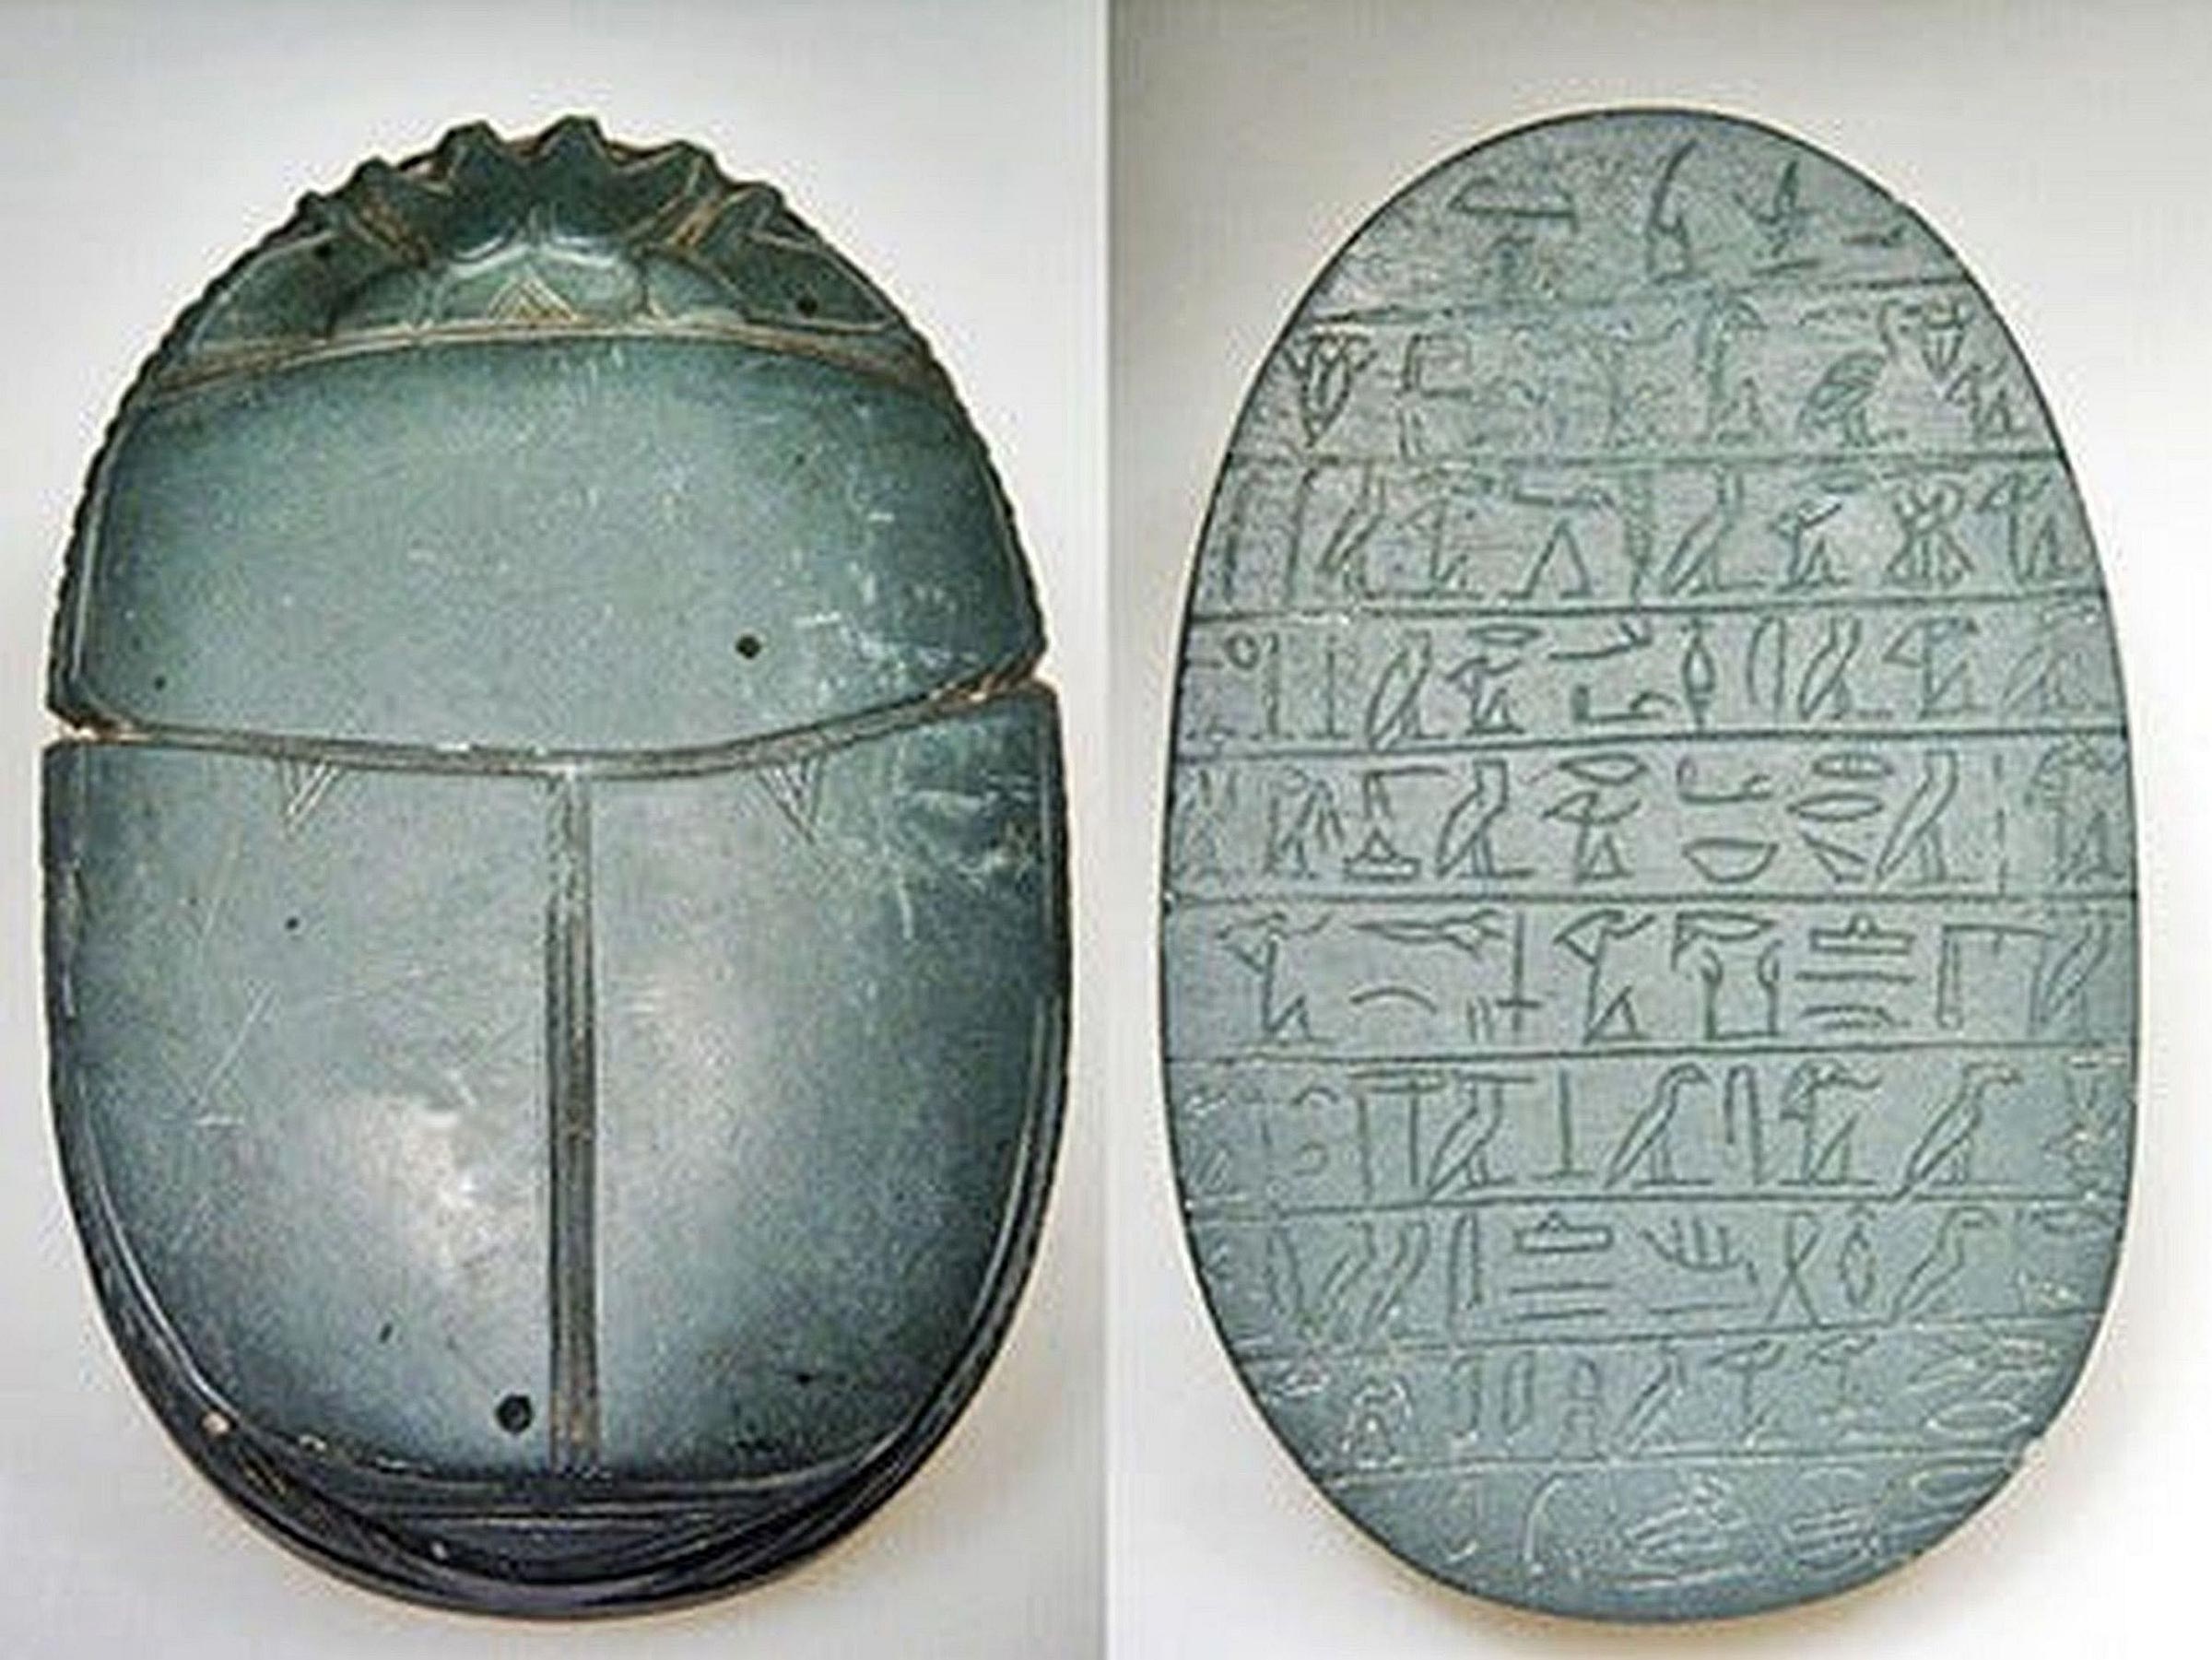 Large Inscribed Egyptian Heart Scarab, possibly schist, with engraved hieroglyphic spell 30B of the Book of the Dead on base, 8.1 x 5.2 cm. Realized $13,000 + buyer’s premium in 2011. Image courtesy of Artemis Gallery and LiveAuctioneers.